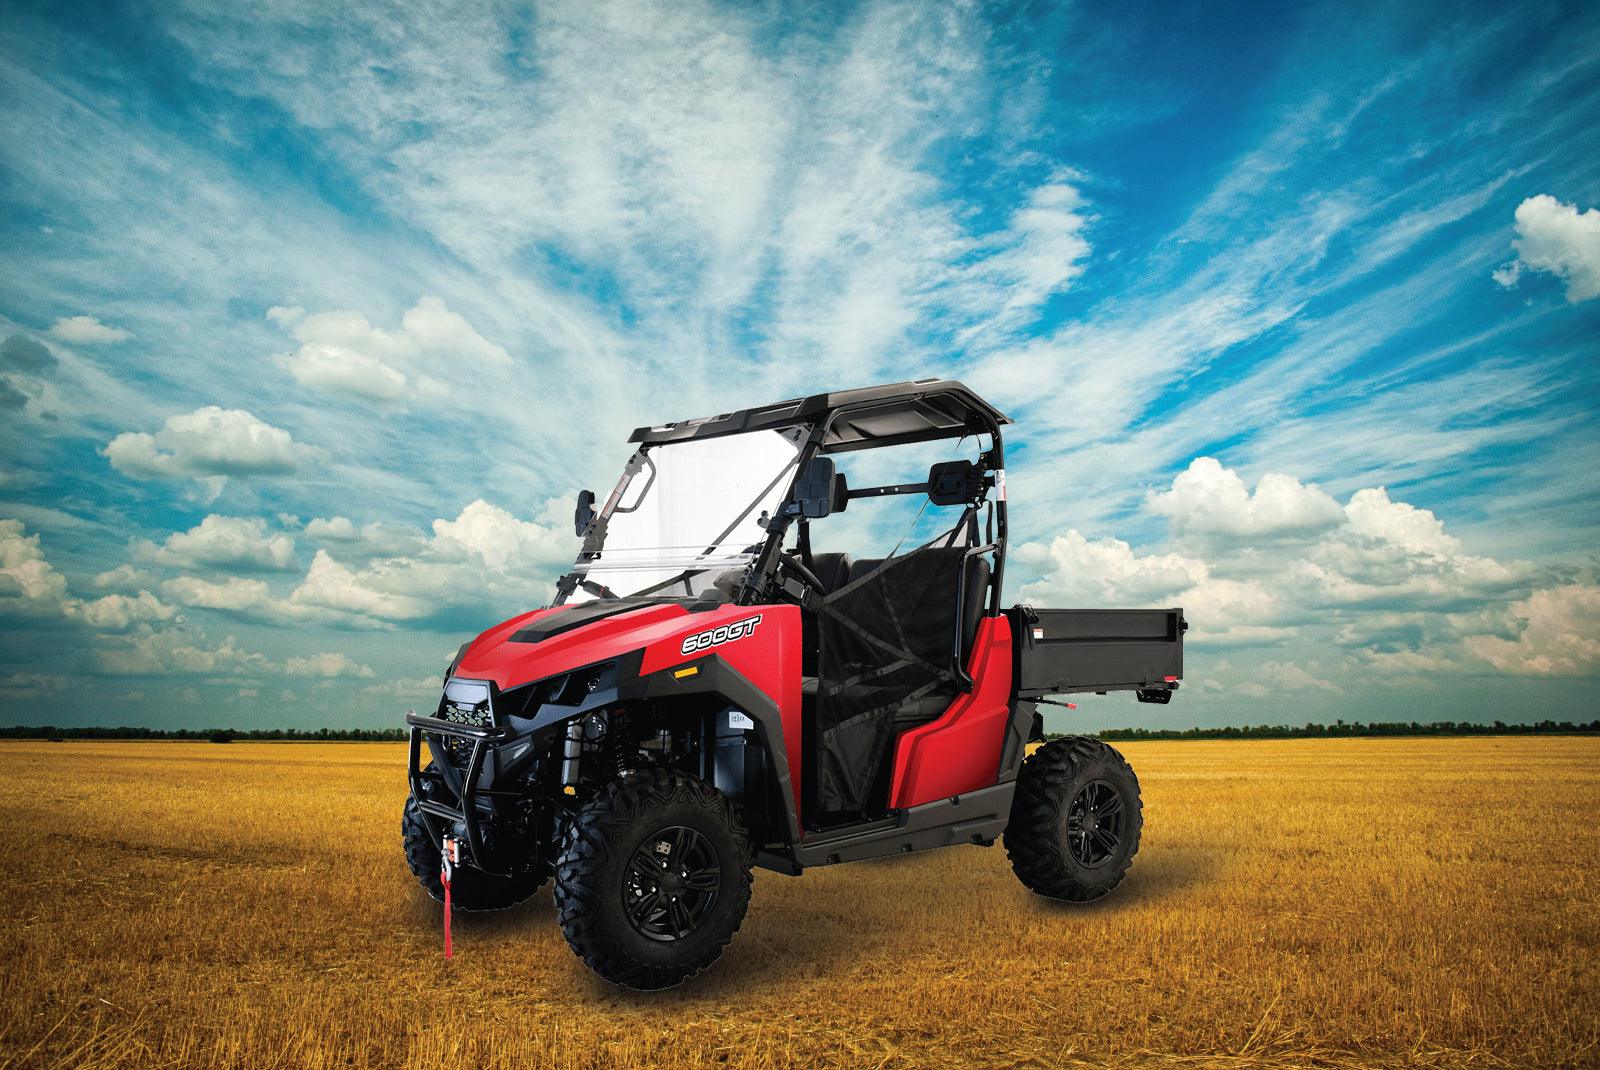 Crossfire 600GT - Adventure Quads and Bikes Online